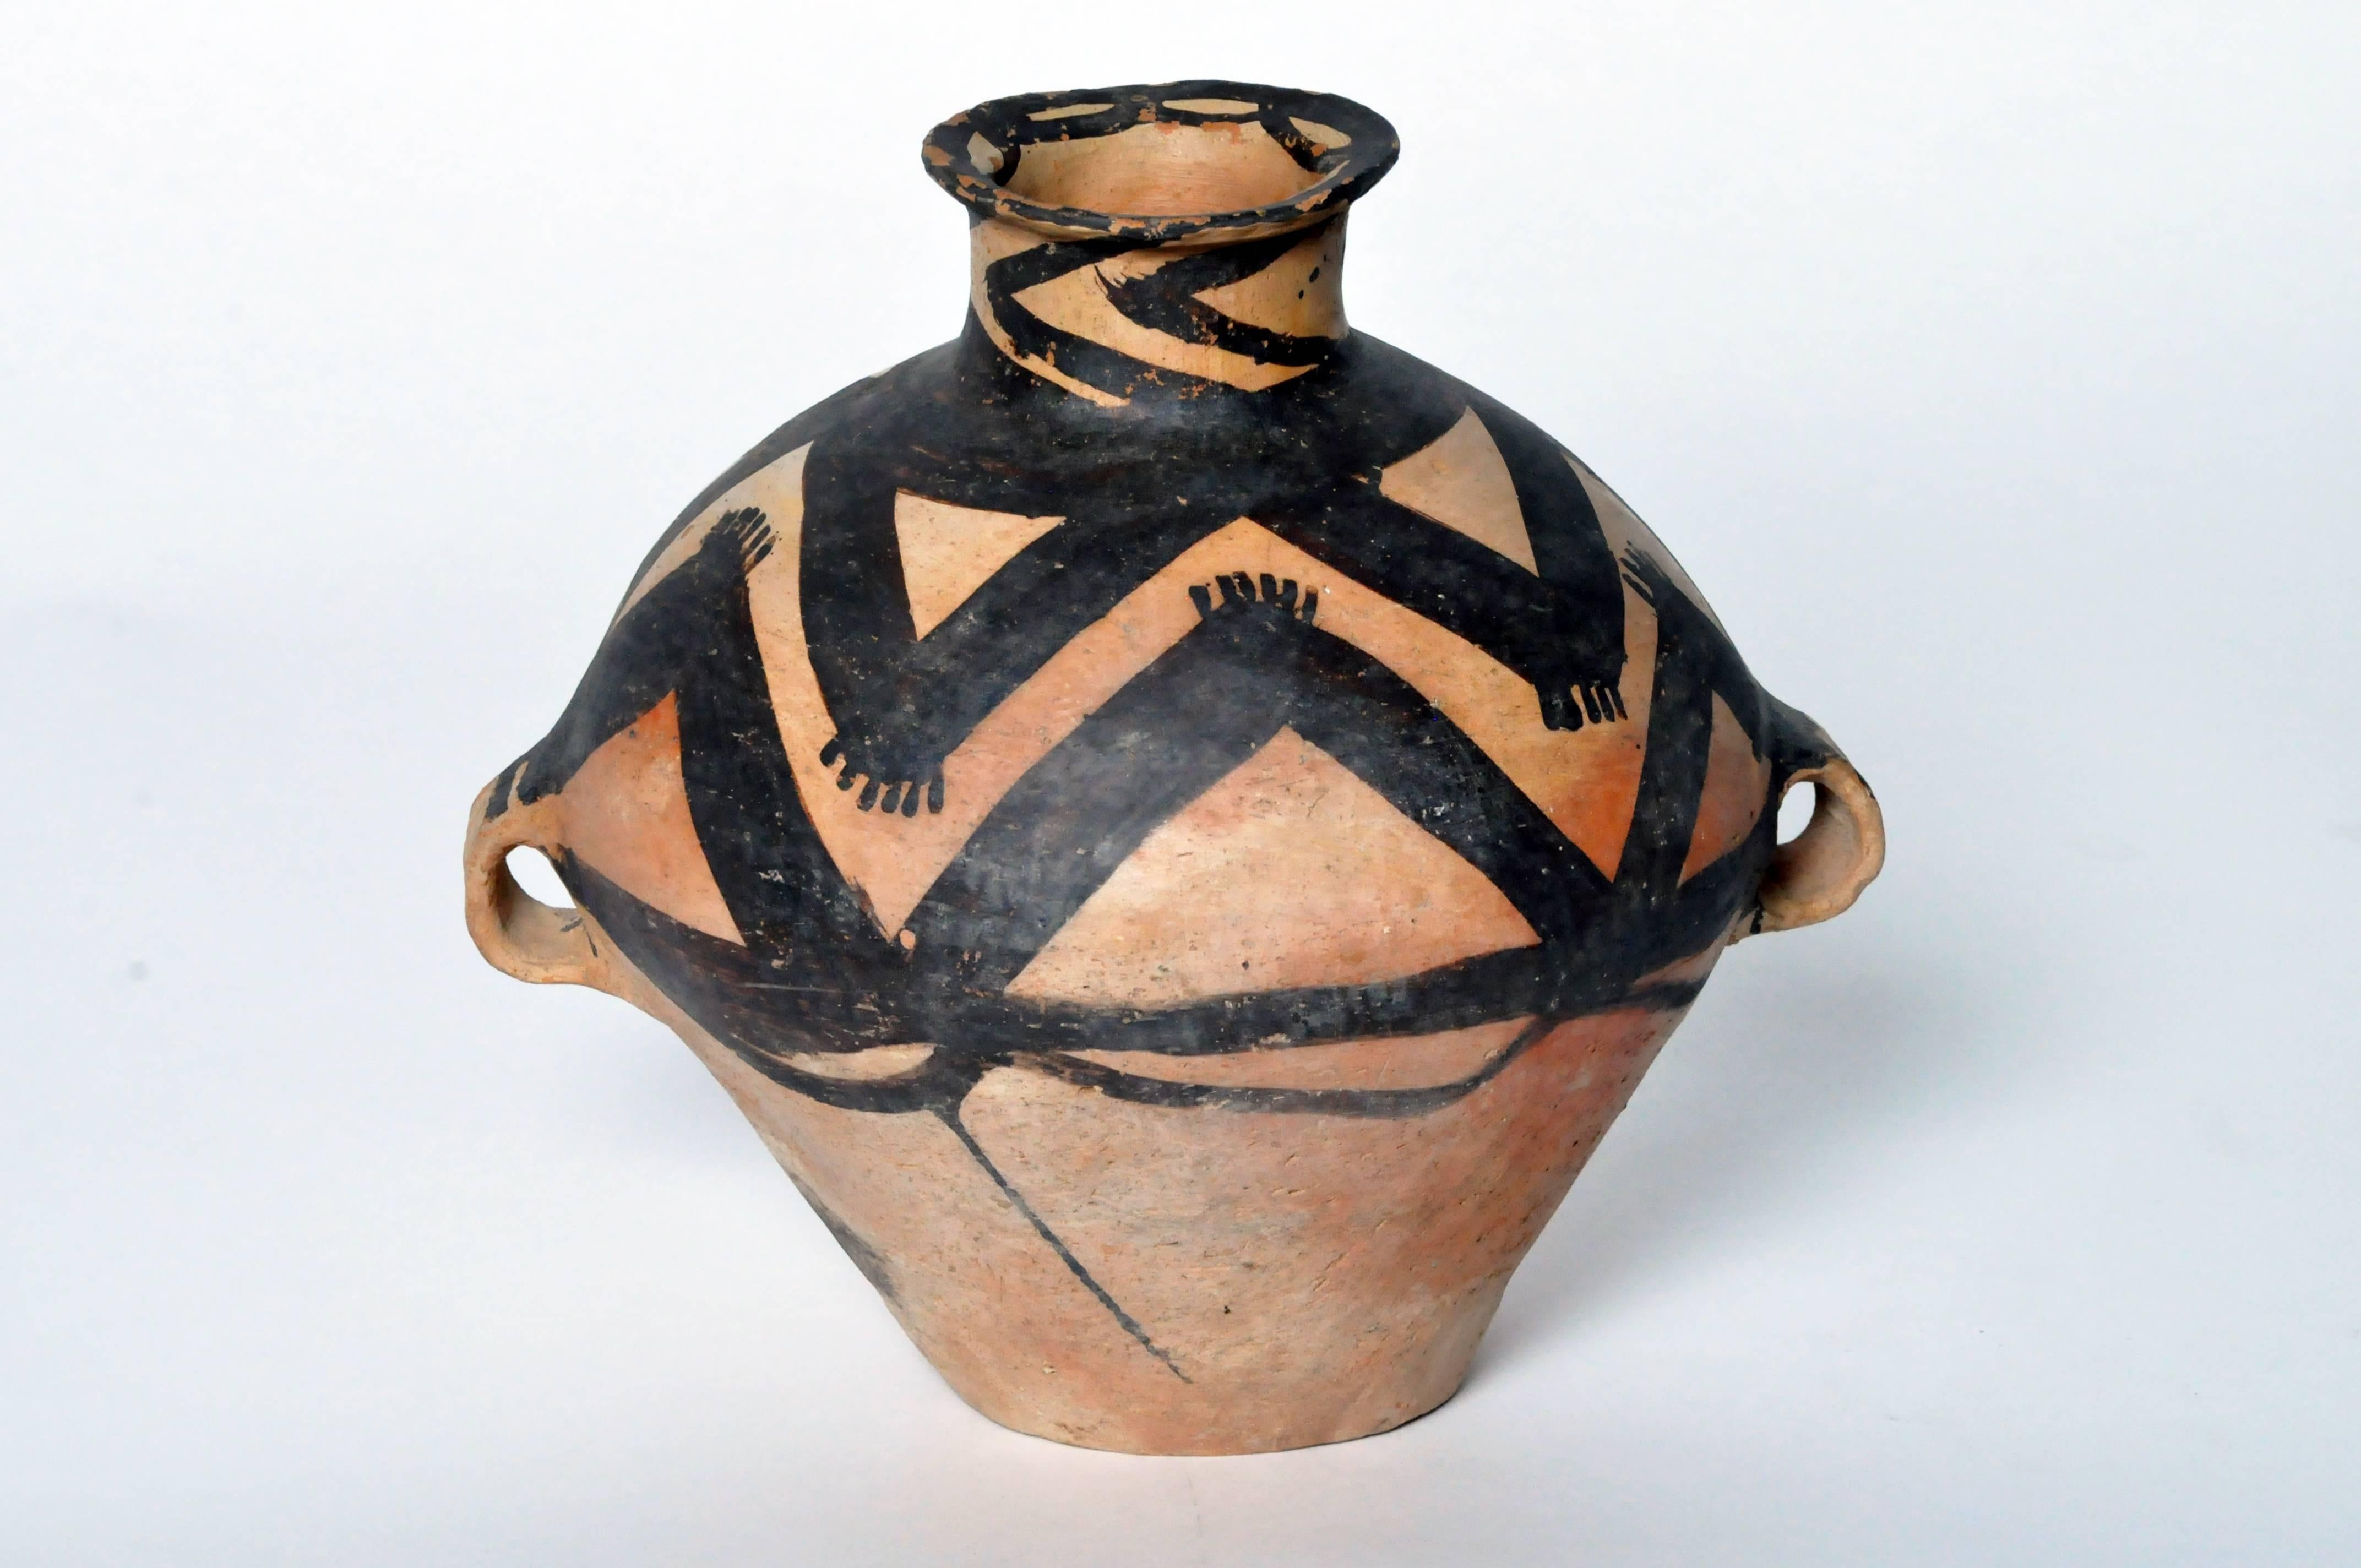 This jar was made in the Yangshao culture and is of the Ma-ch’ang type. This culture thrived in the northwestern part of China along and around the Yellow River between 3000 B.C. and 1700 B.C. The piece is in very good condition with no cracks to